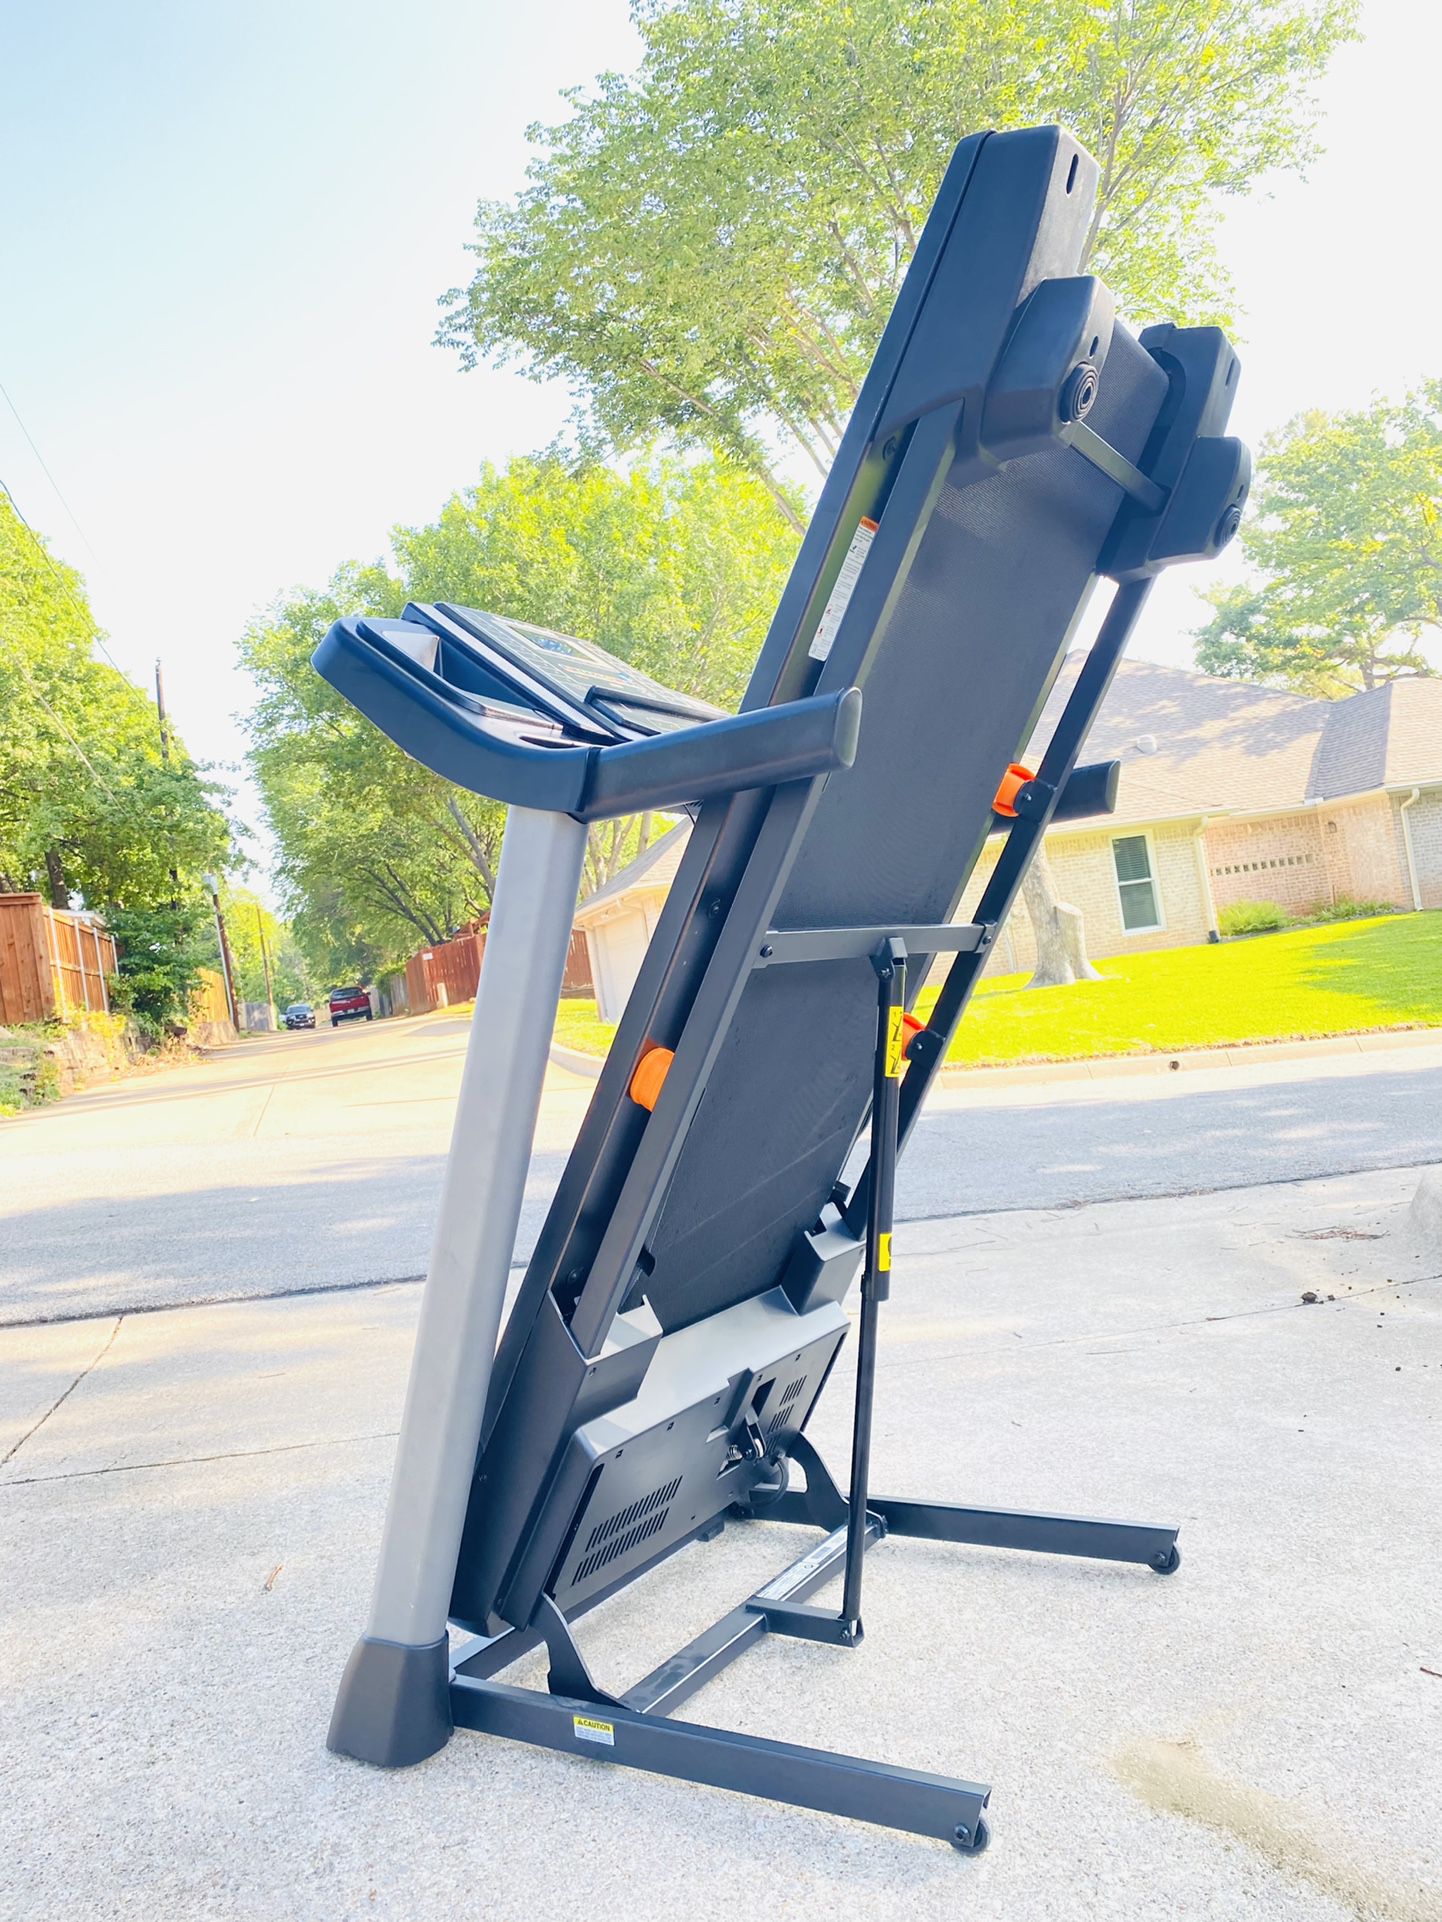 Nordictrack T6.5s Treadmill With Incline 